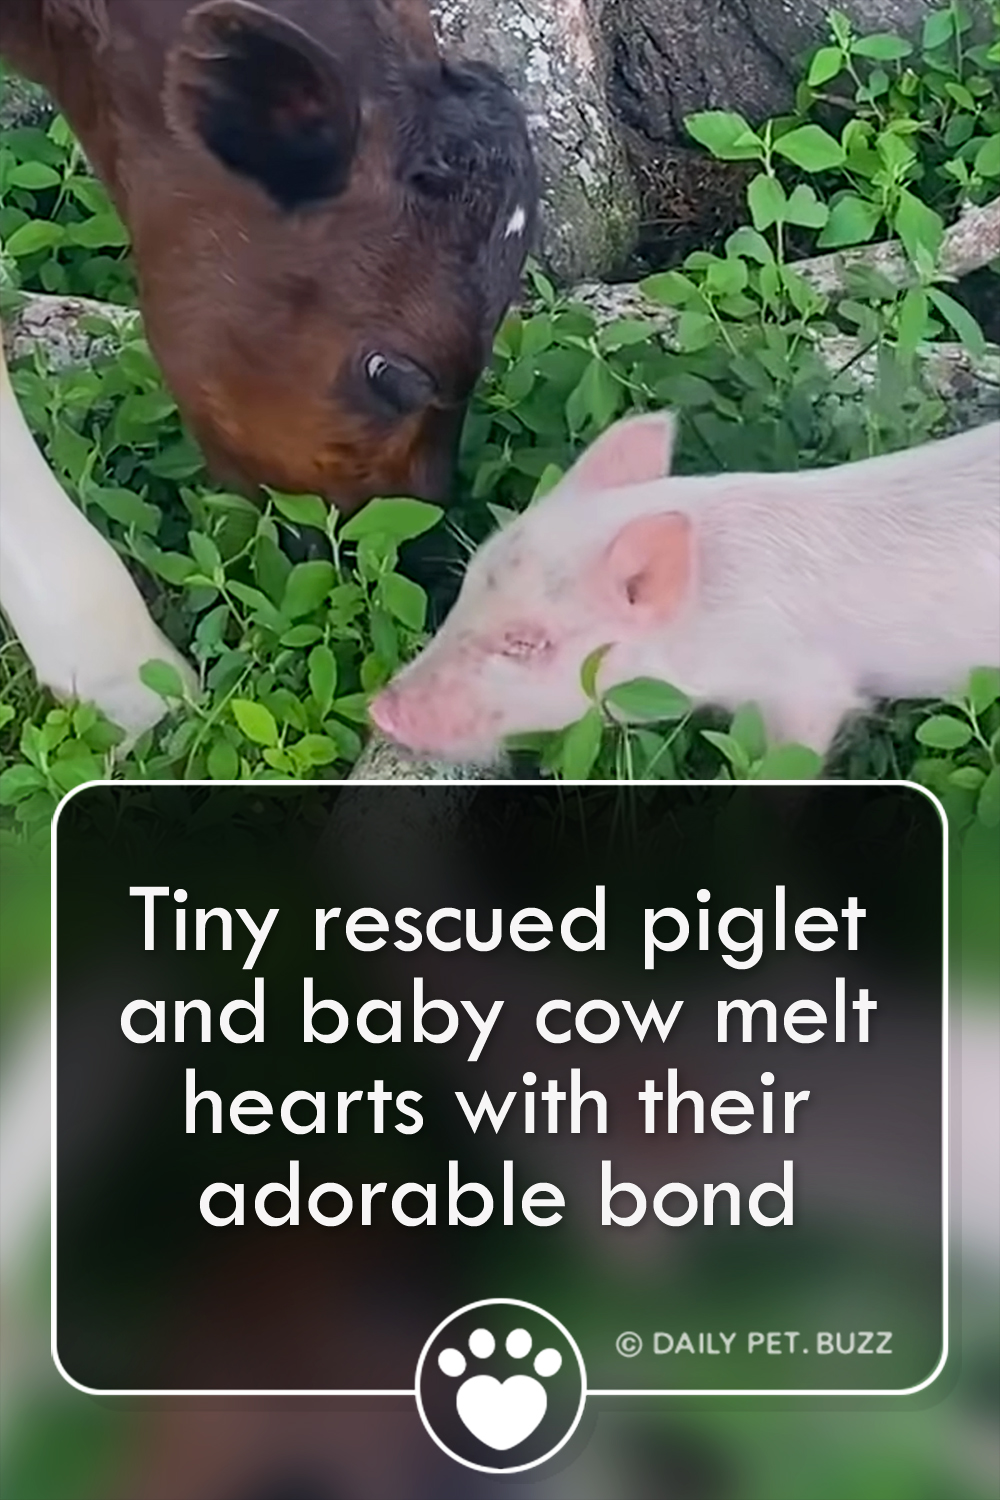 Tiny rescued piglet and baby cow melt hearts with their adorable bond